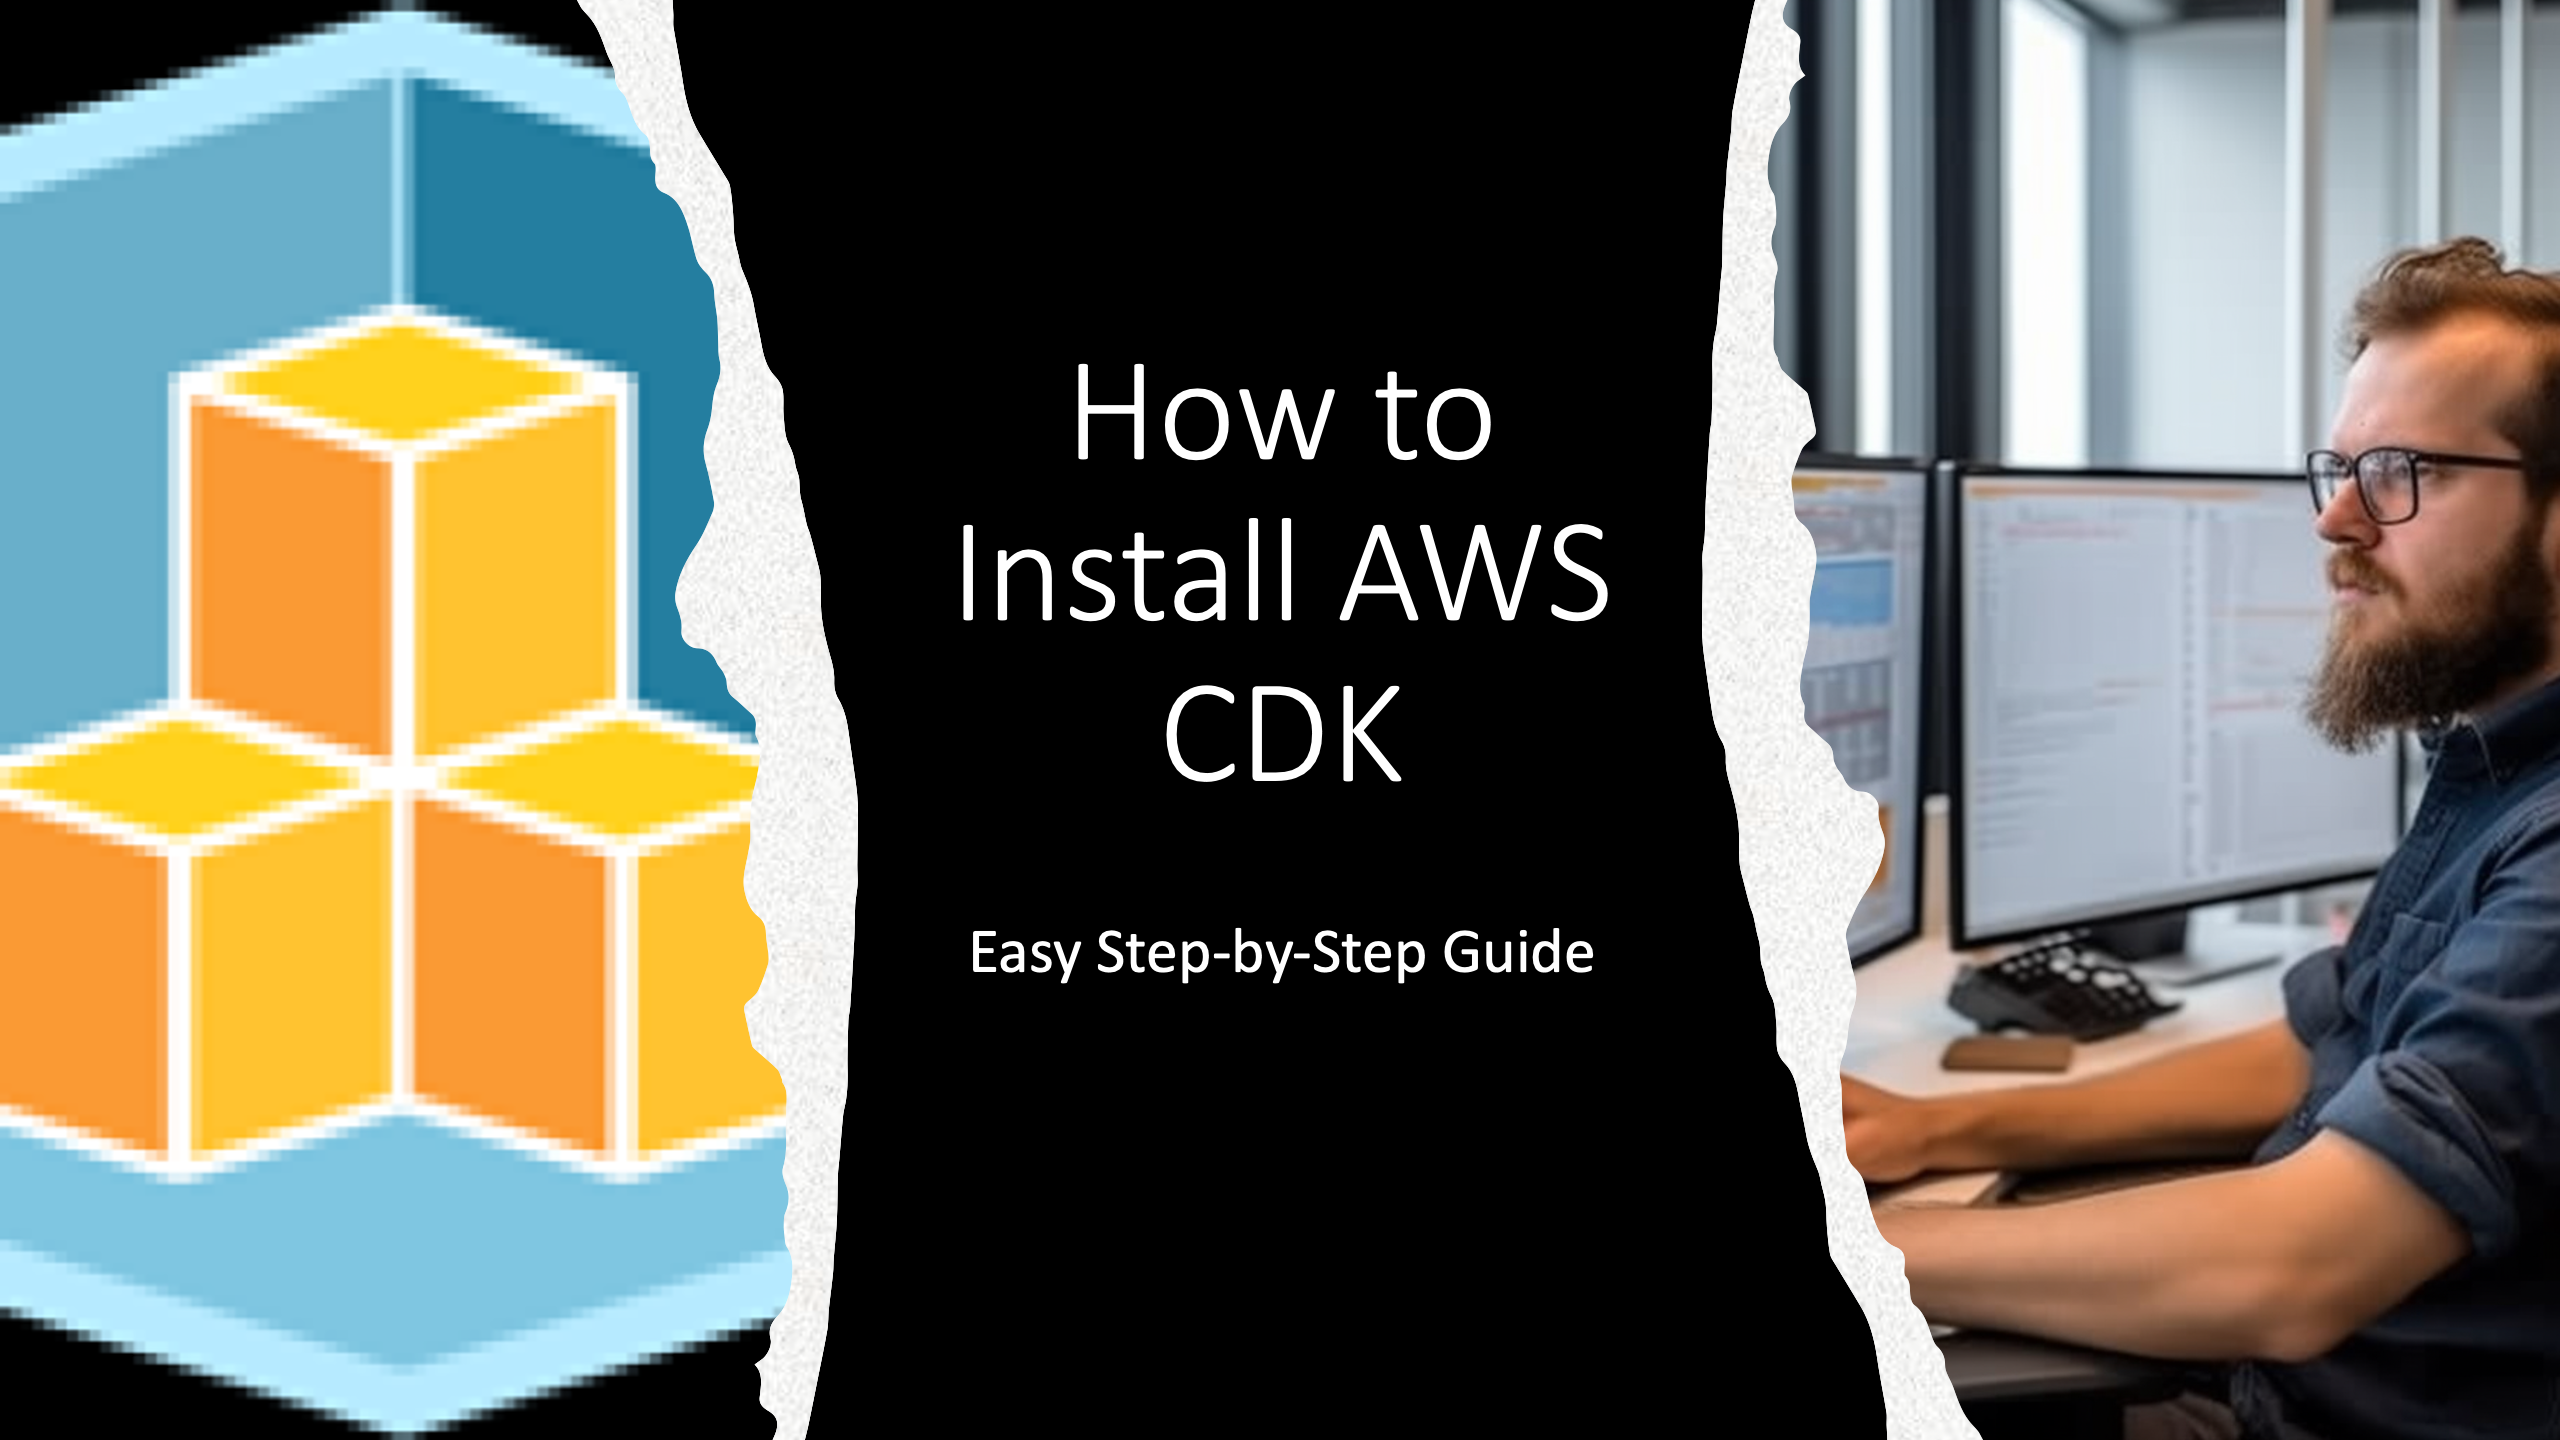 How to Install AWS CDK - Easy Step-by-Step Guide